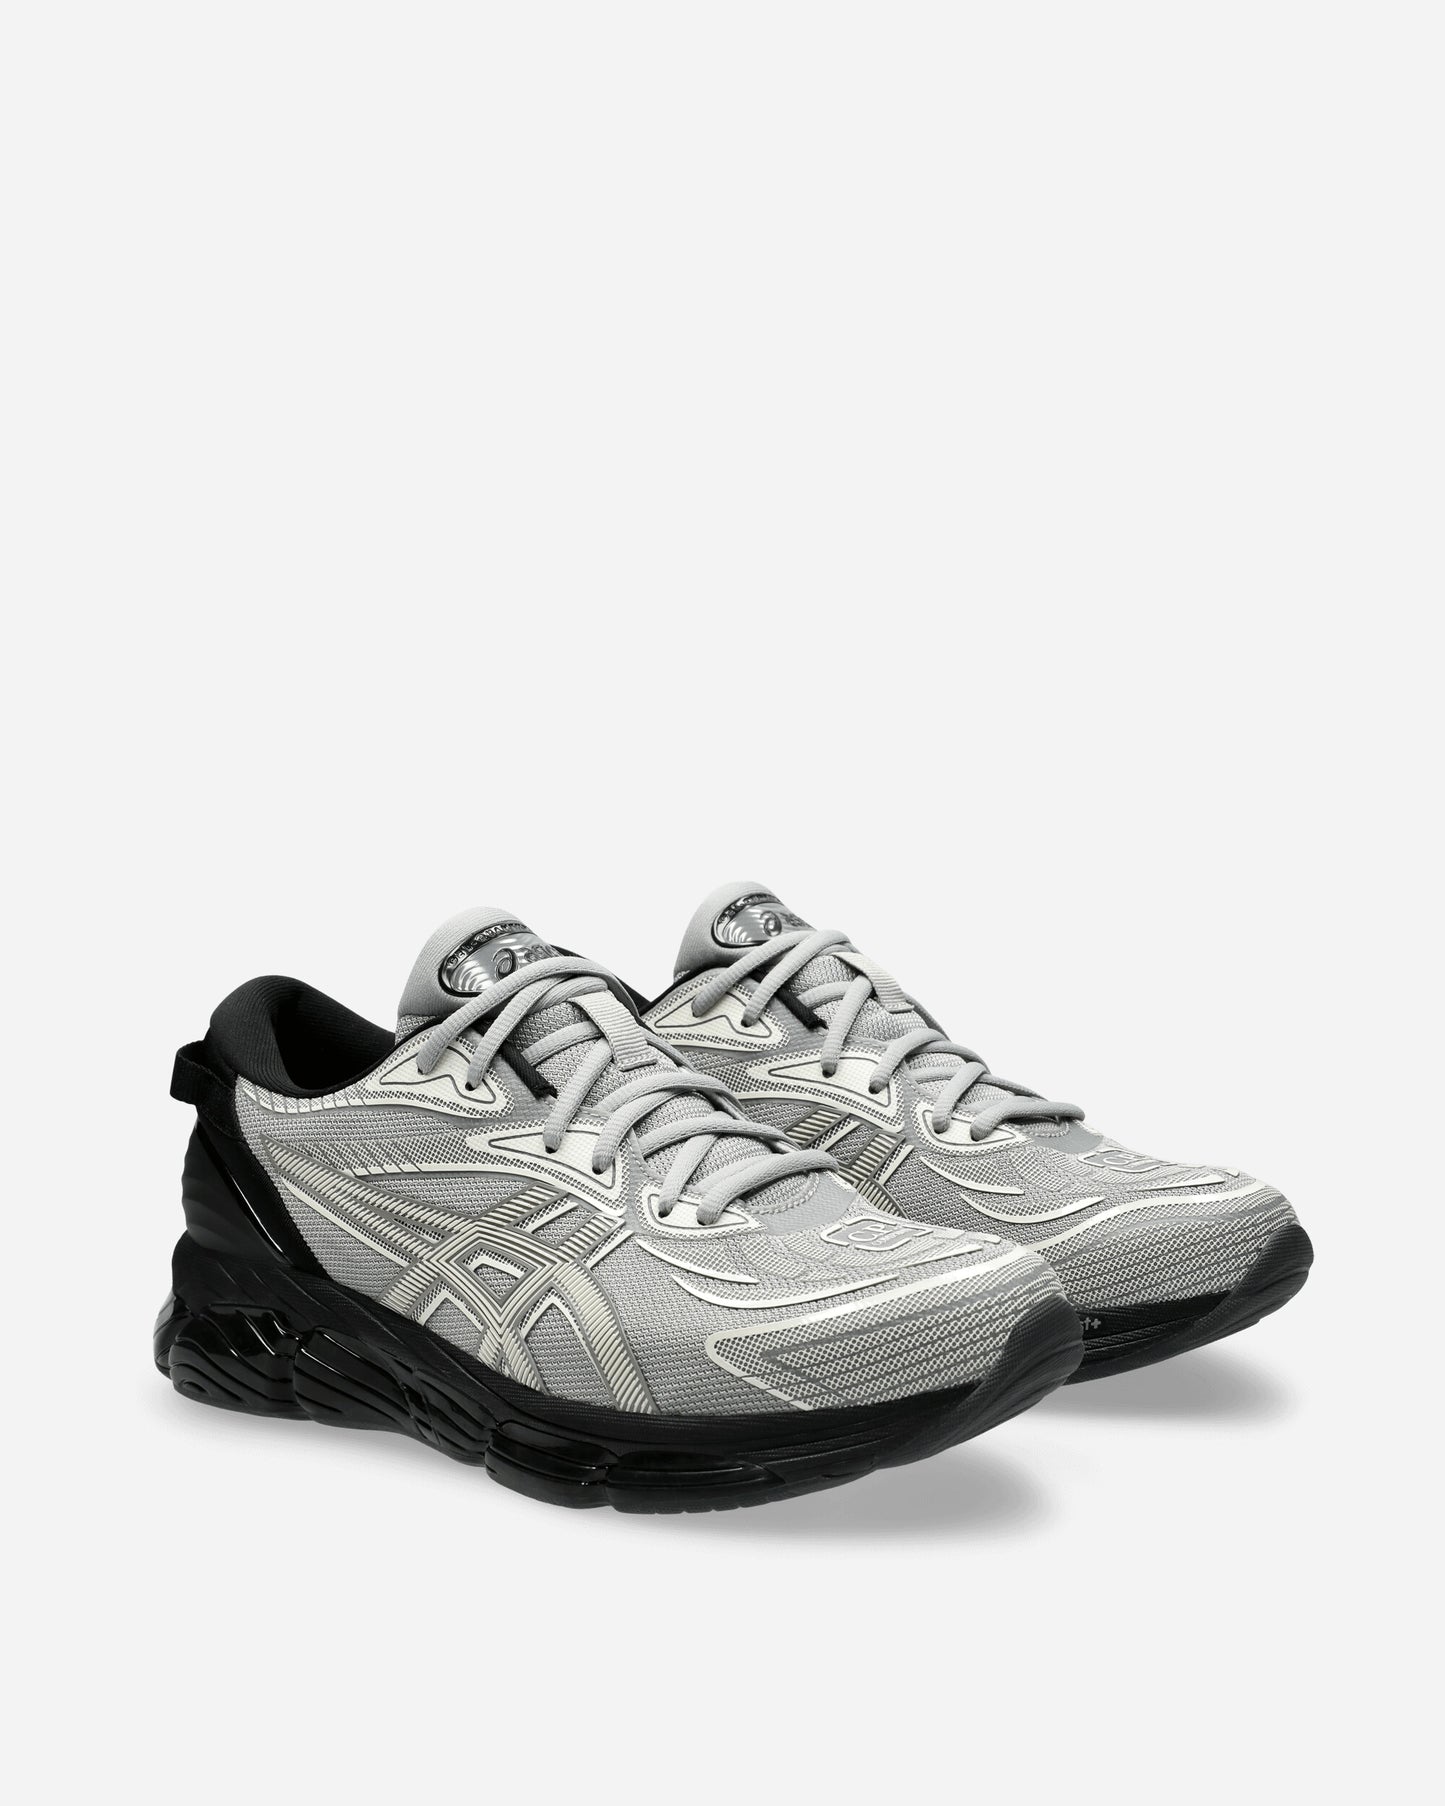 Asics Gel-Quantum 360 VIII Cement Grey/Cement Grey Sneakers Low 1203A507-020